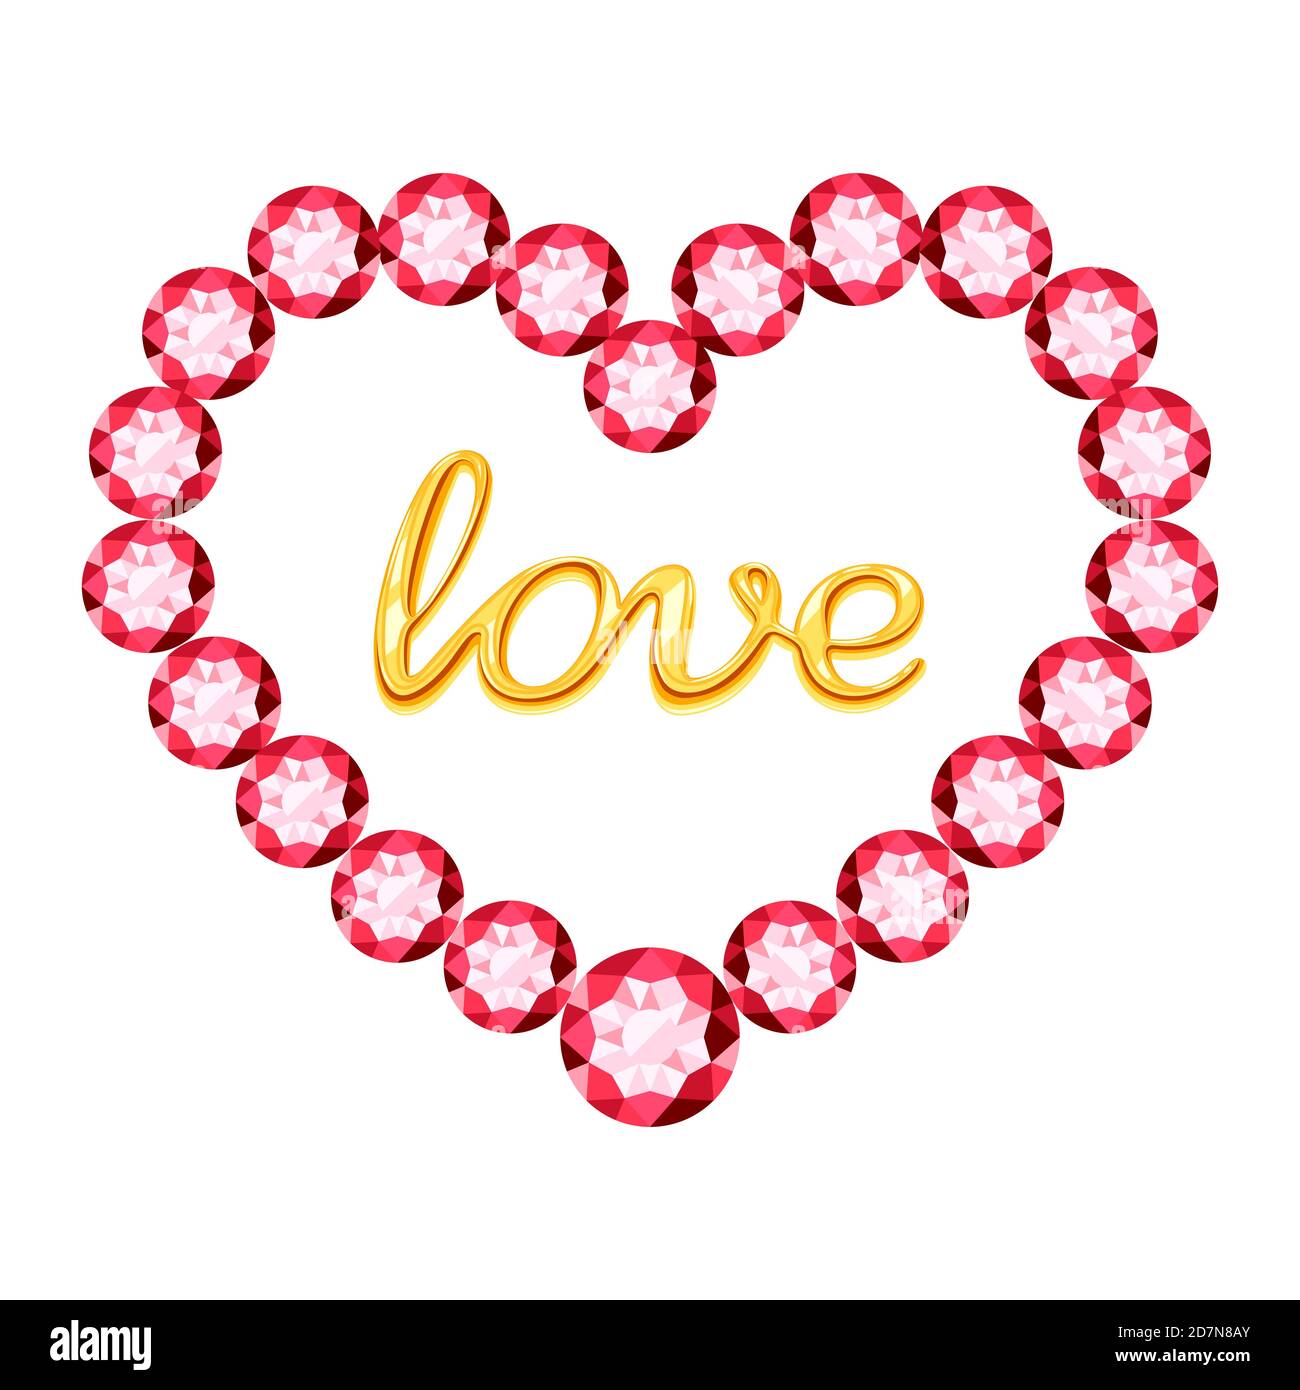 Pink heart of crystals and gold inscription love isolated on white background. Pink gem heart, jewelry precious shape illustration Stock Vector